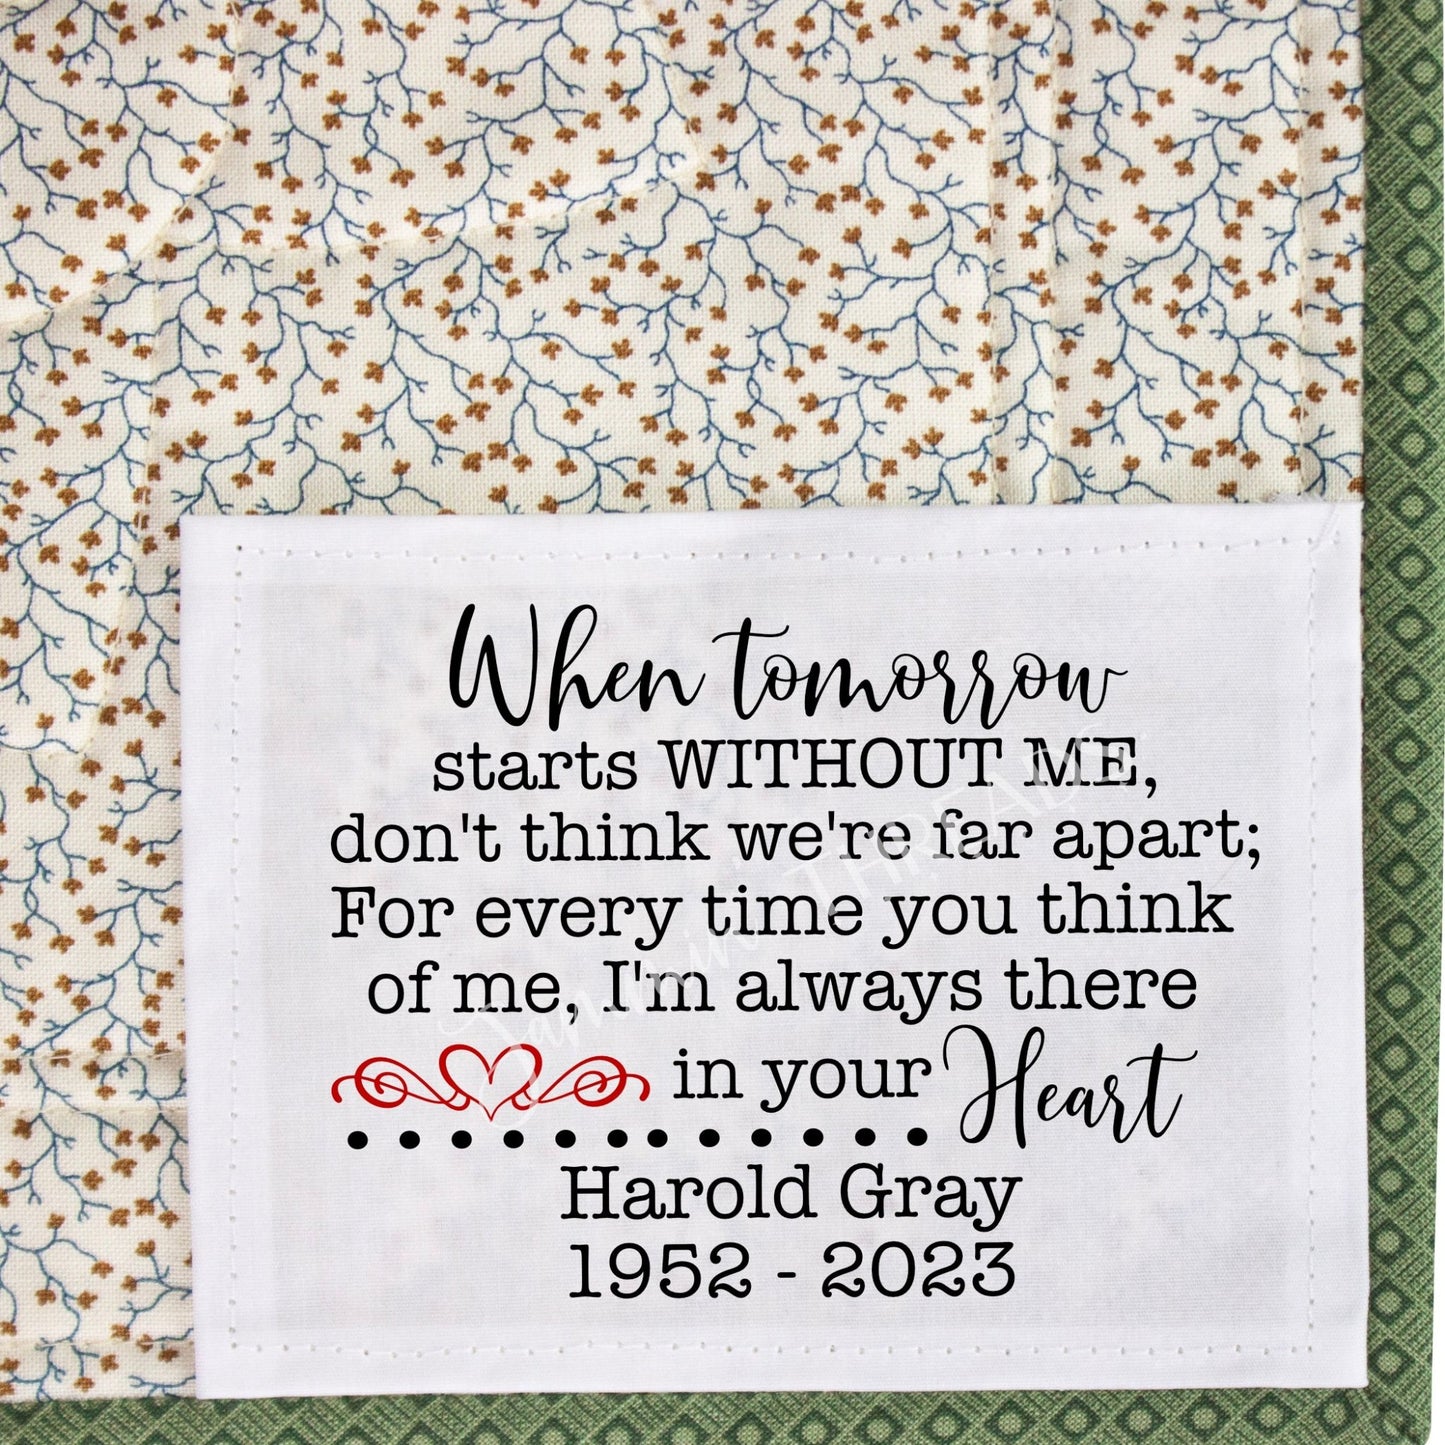 When Tomorrow Starts Without Me. Personalized Memory Quilt Label - Jammin Threads